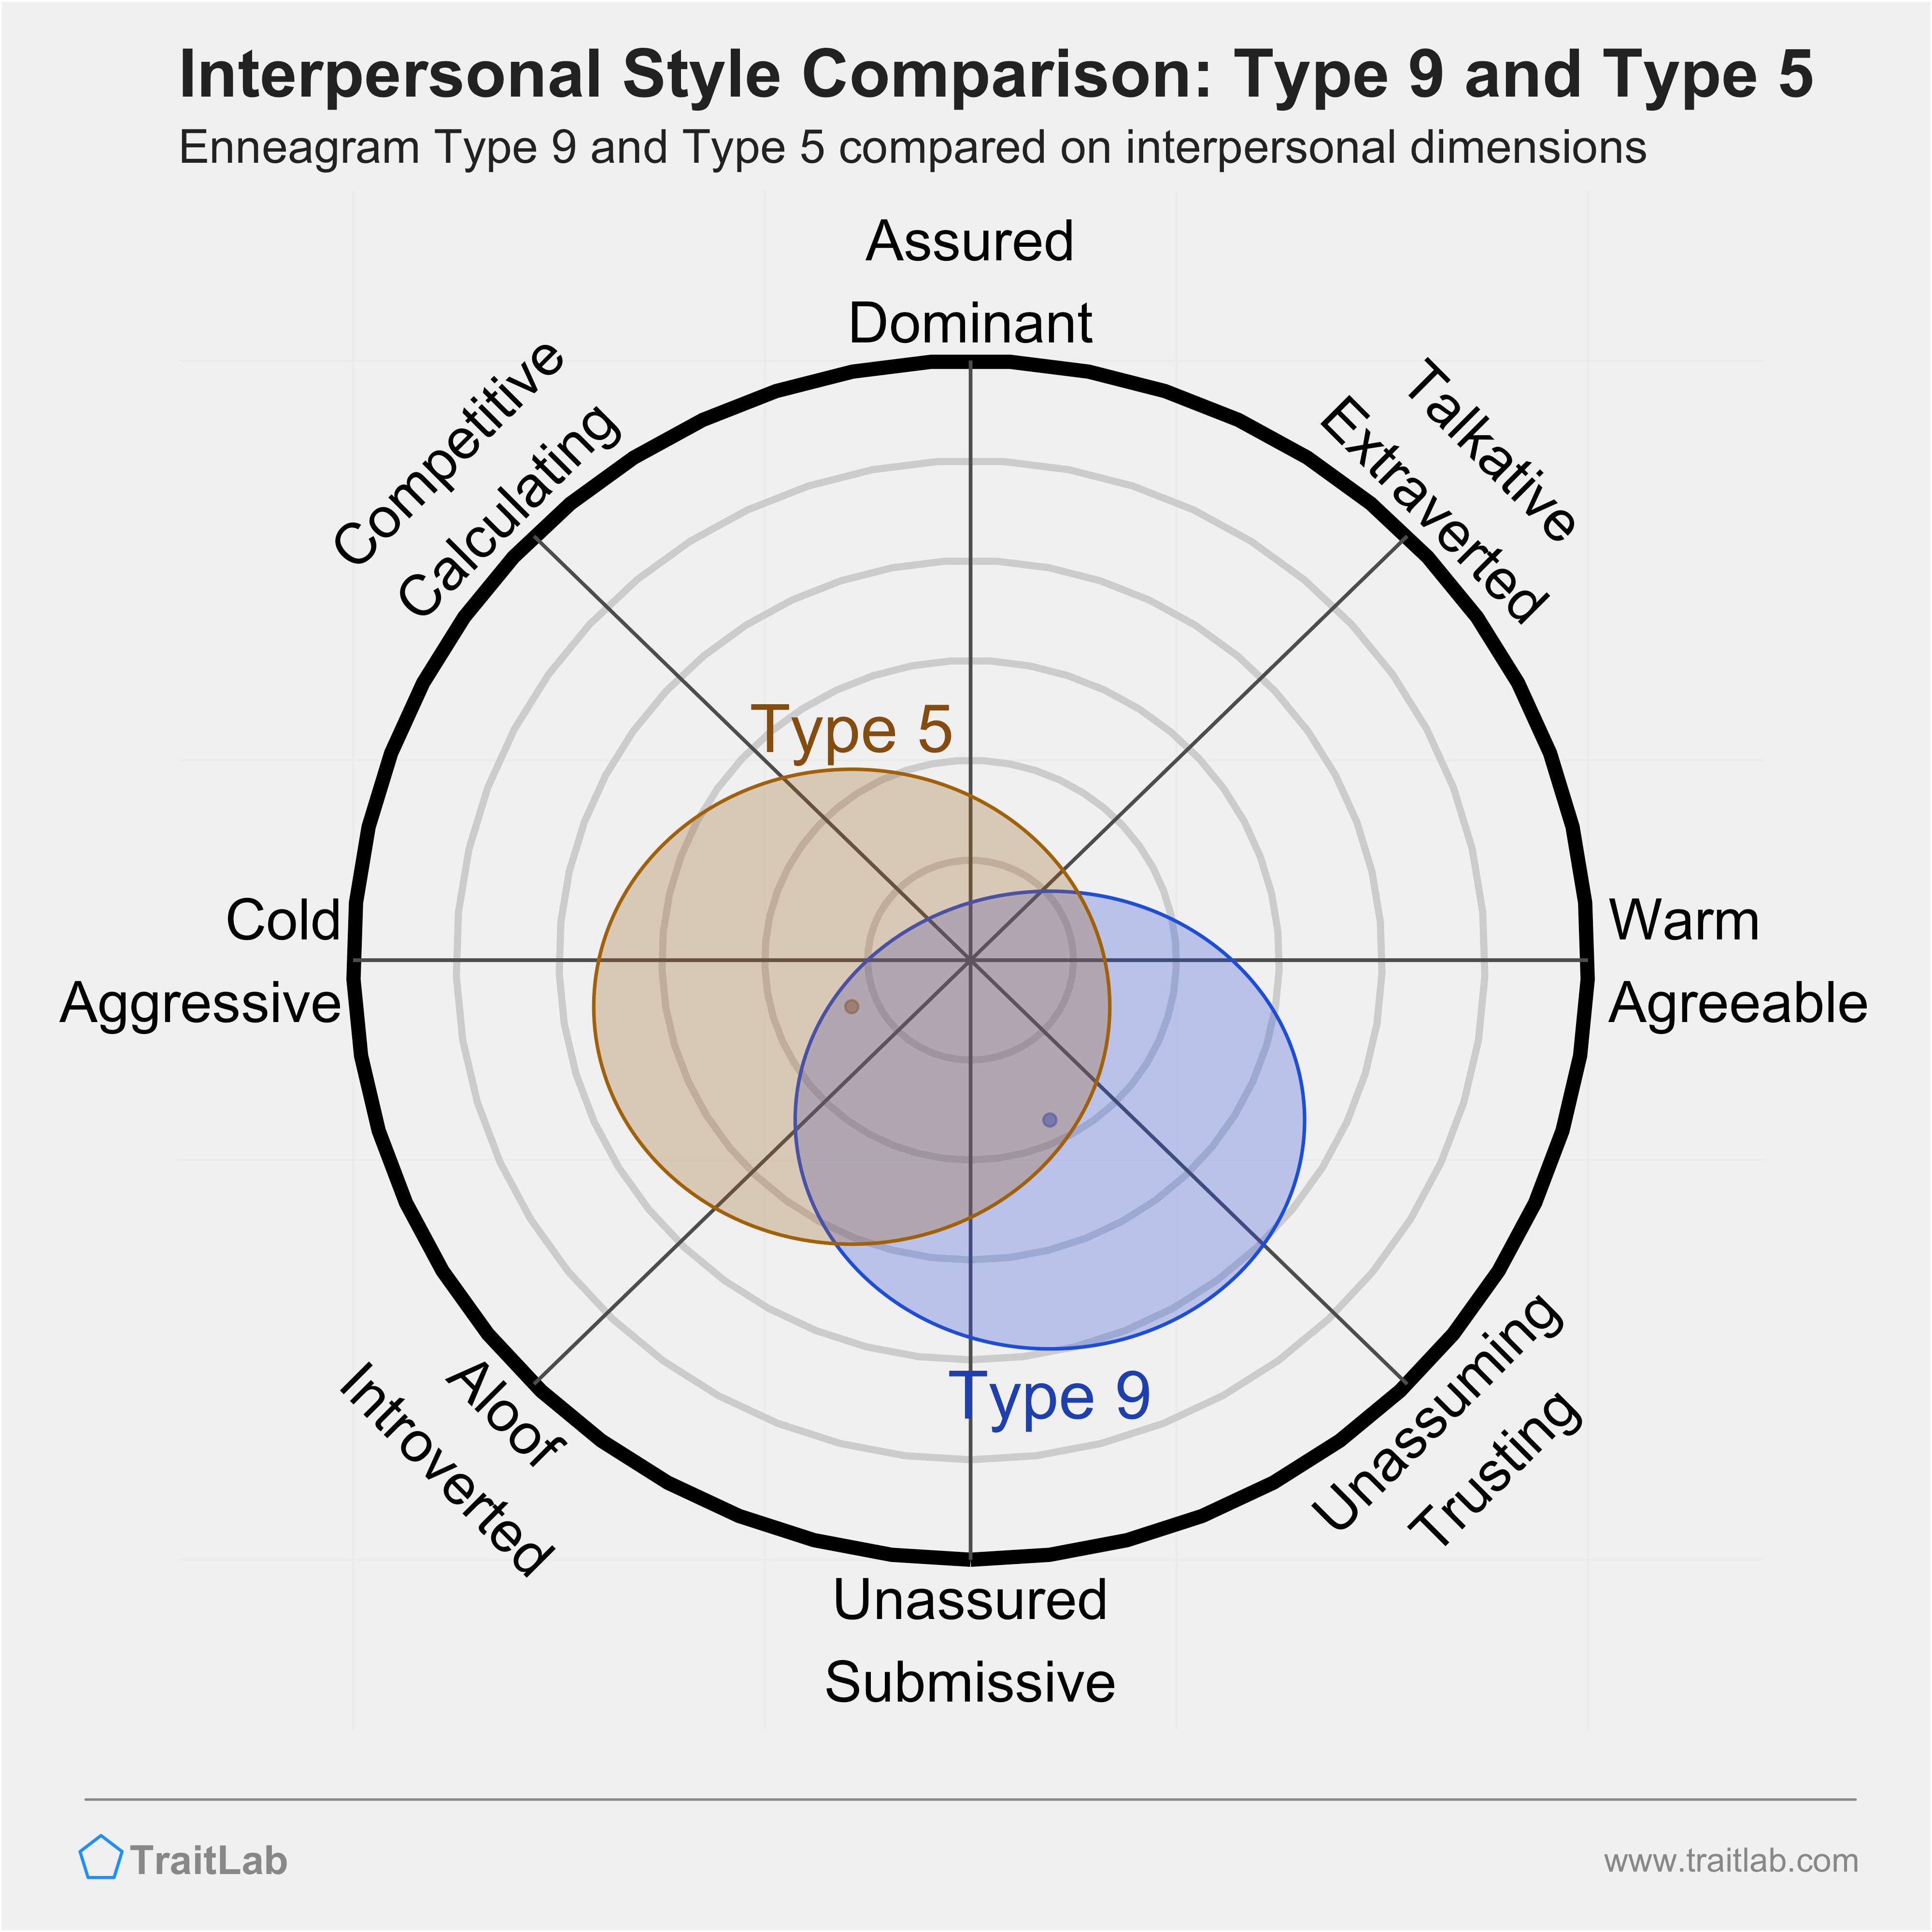 Enneagram Type 9 and Type 5 comparison across interpersonal dimensions